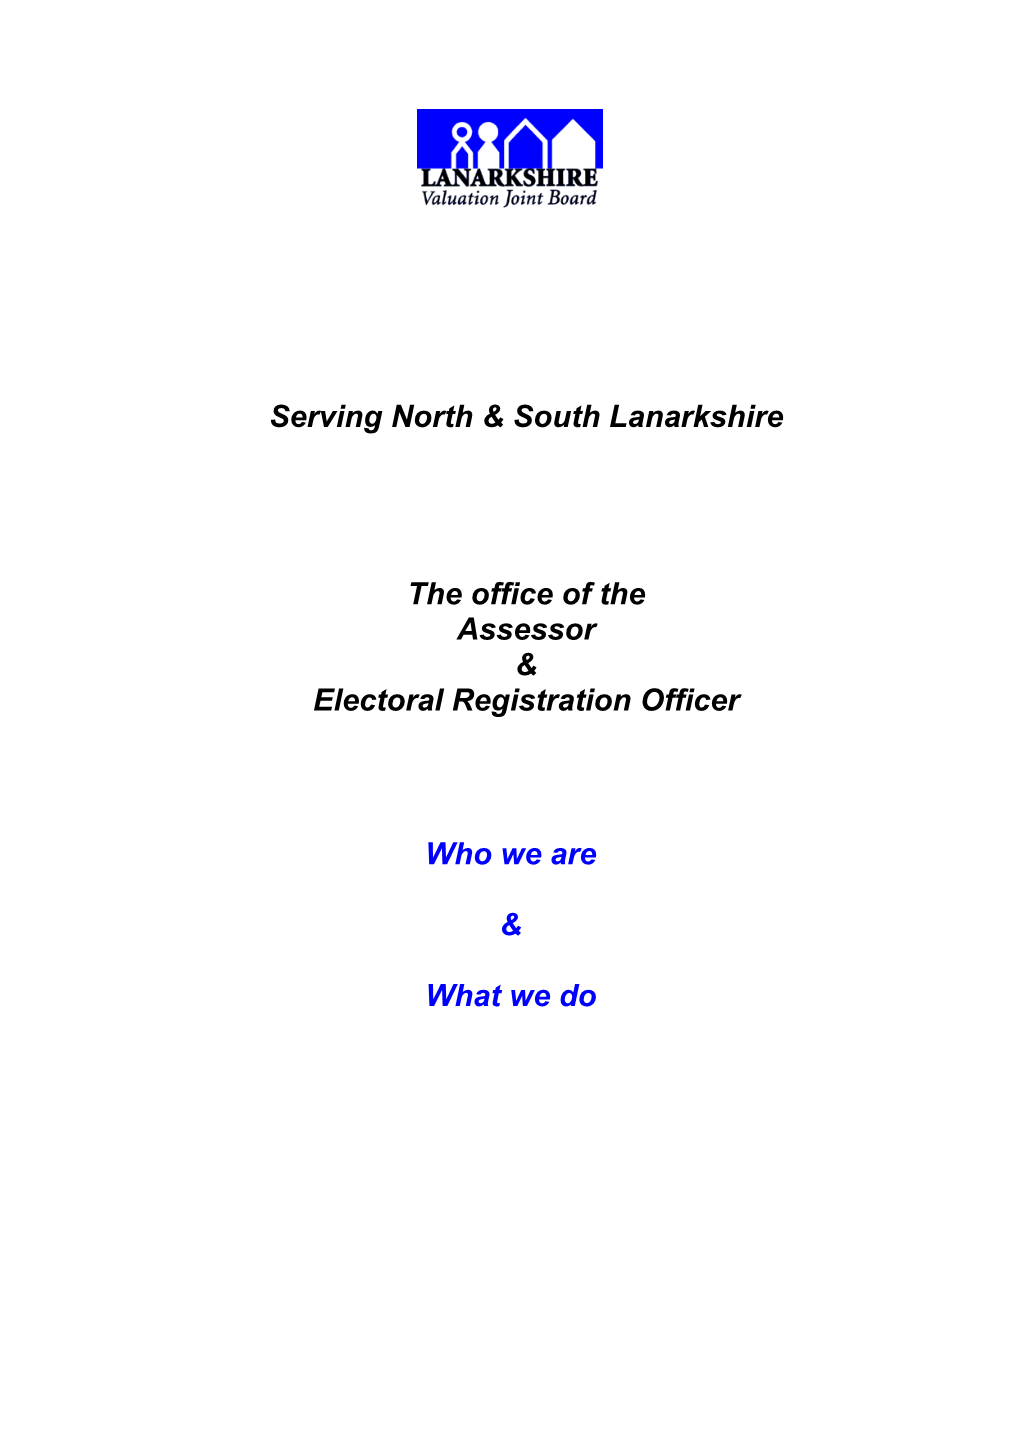 Download Application Forms Relating to Electoral Registration